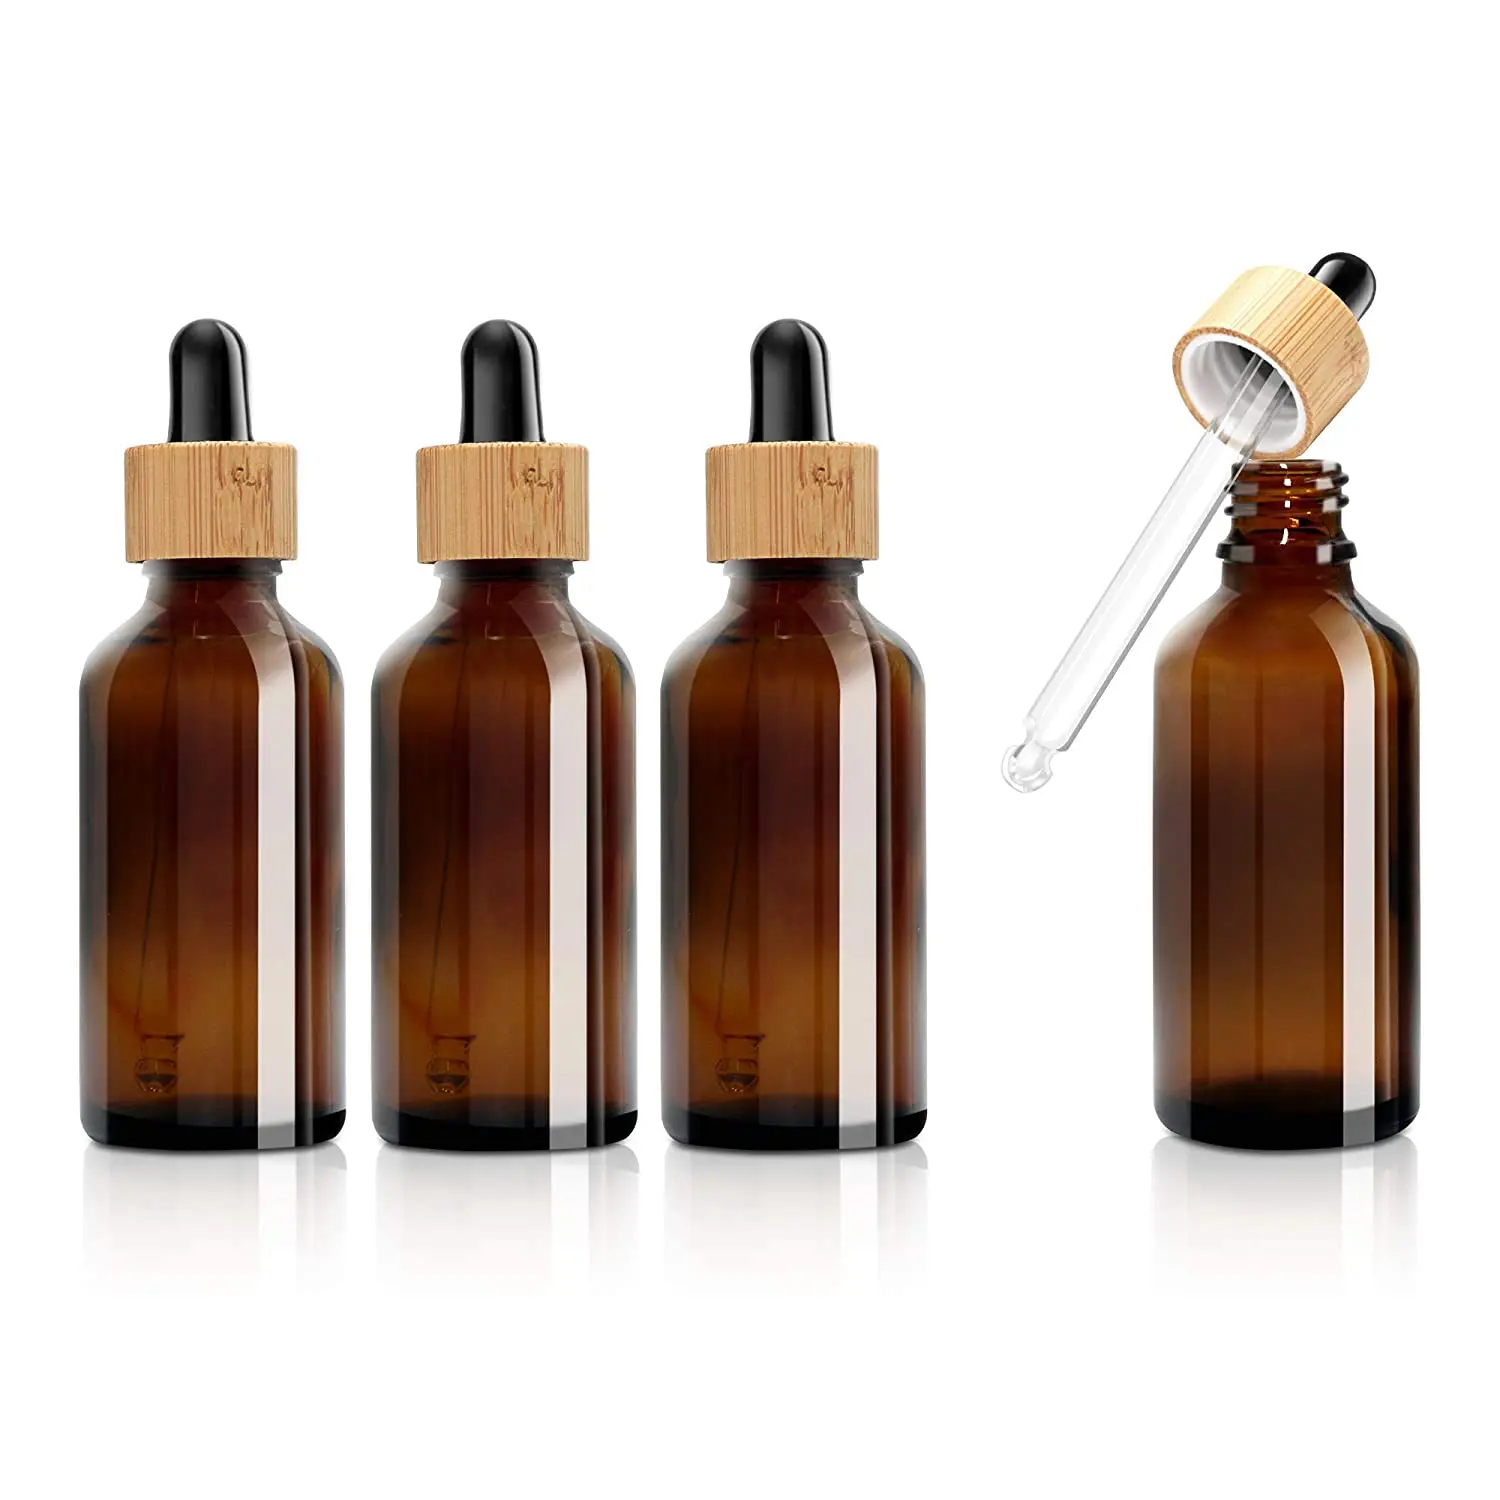 

4pcs Glass Dropper Bottles Essential Oil Bottles With Eye Dropper Lids Perfume Sample Vials Essence Liquid Cosmetic Containers